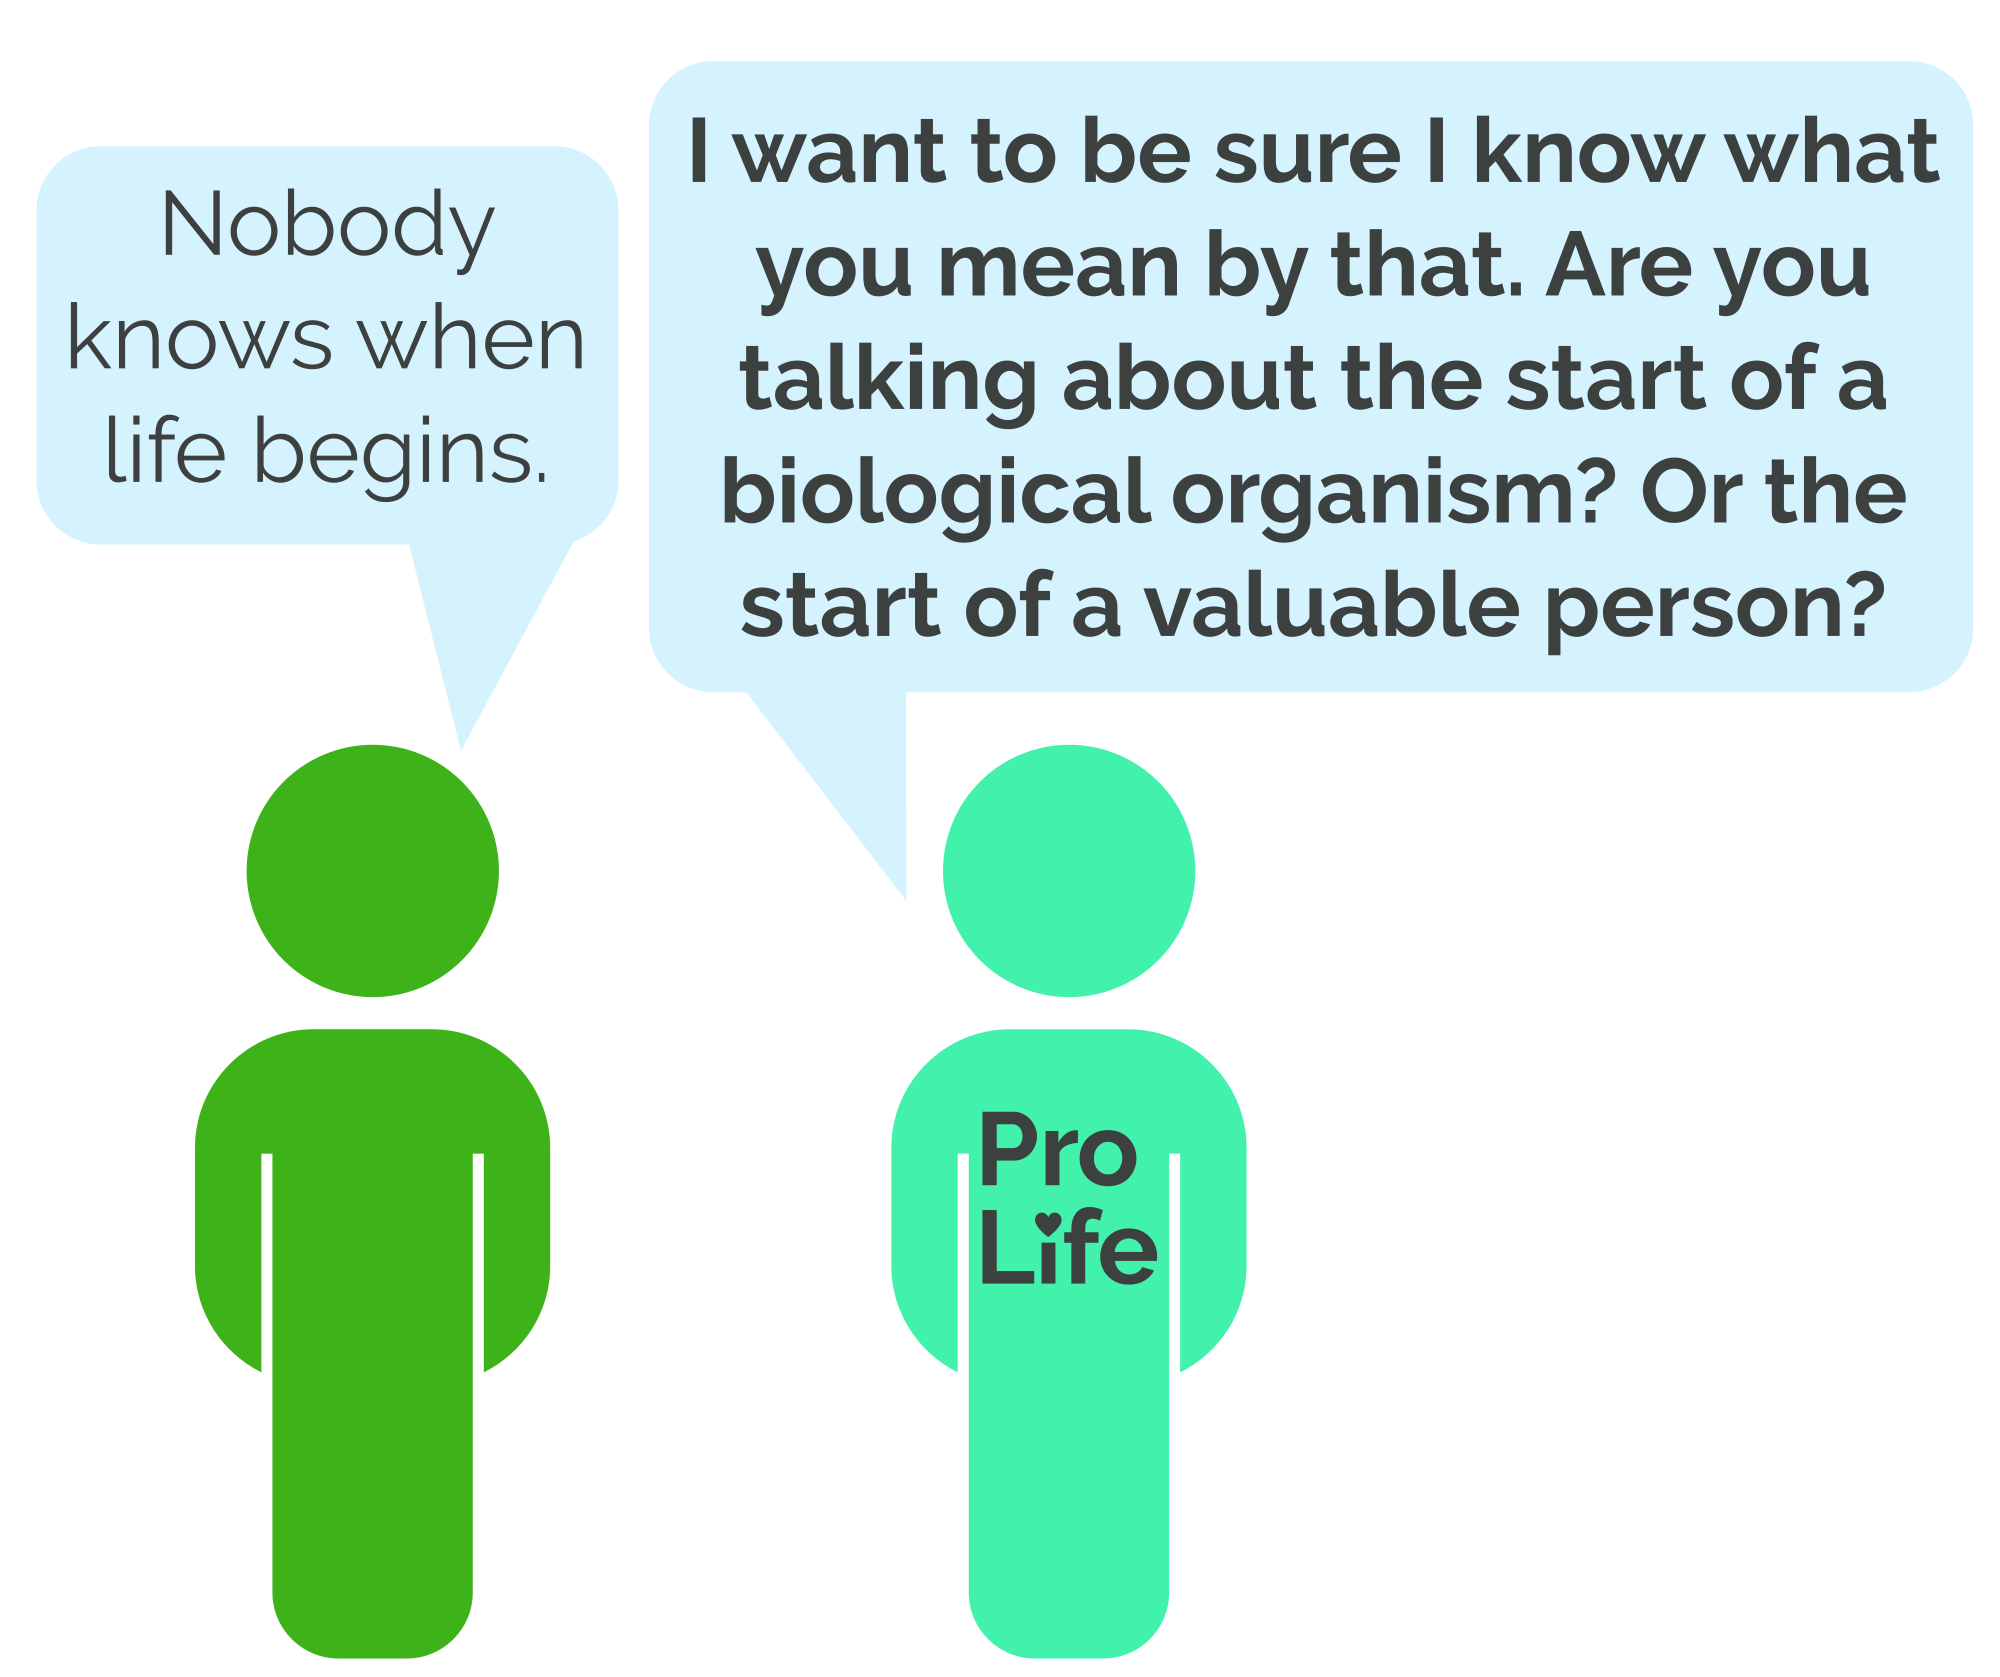 Person 1: Nobody knows when life begins. Person 2 (our hero): I want to be sure I know what you mean by that. Are you talking about the start of a biological organism? Or the start of a valuable person?